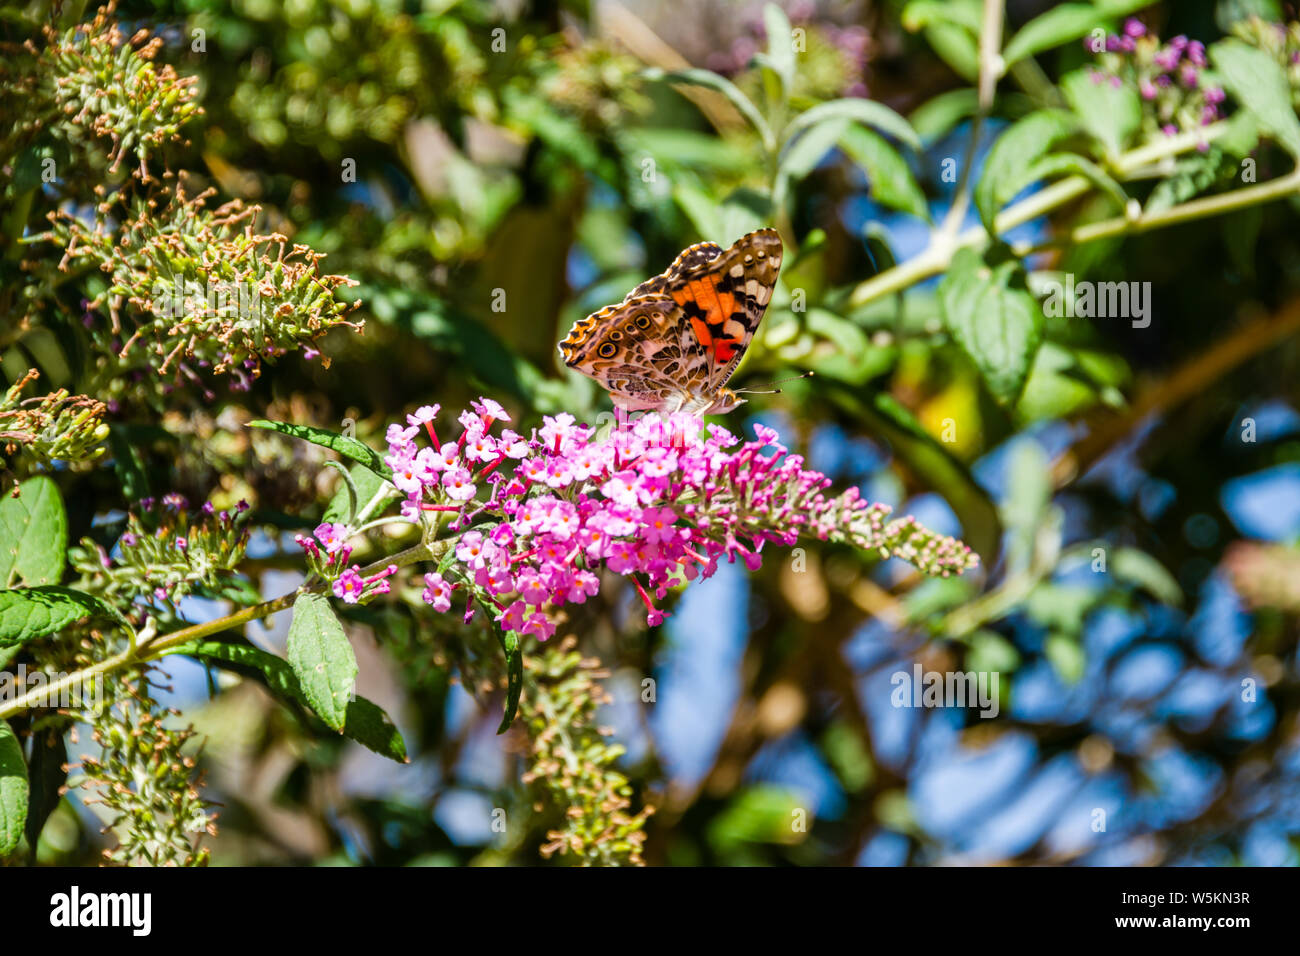 Brush-Footed Butterfly Foto Stock